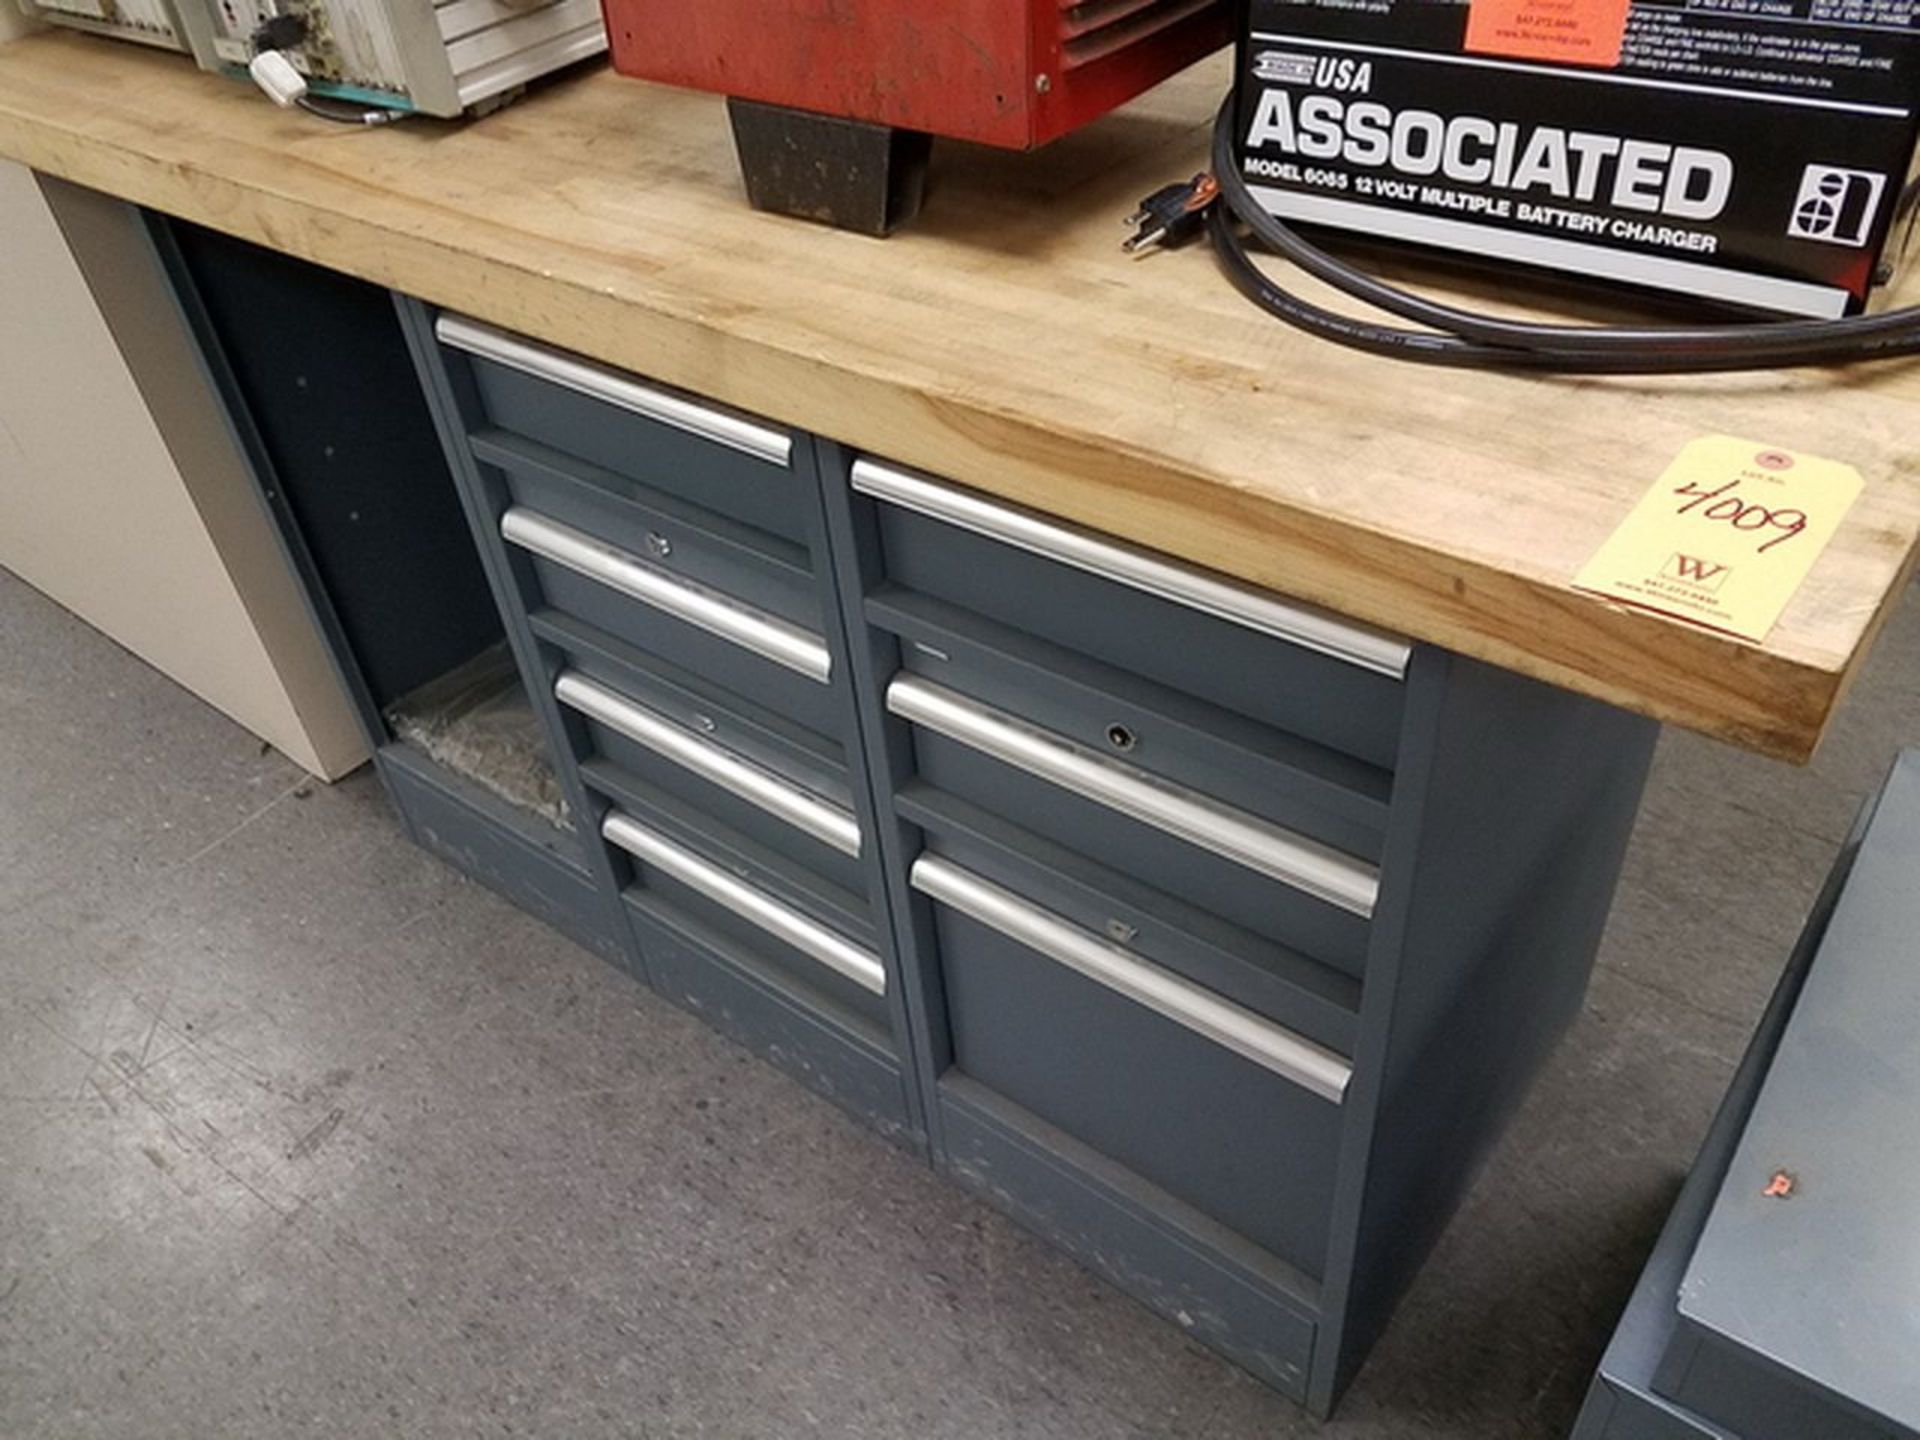 7-Drawer Maple Top Workbench. Loc: Basement AME room. (Bsmt AME Room)